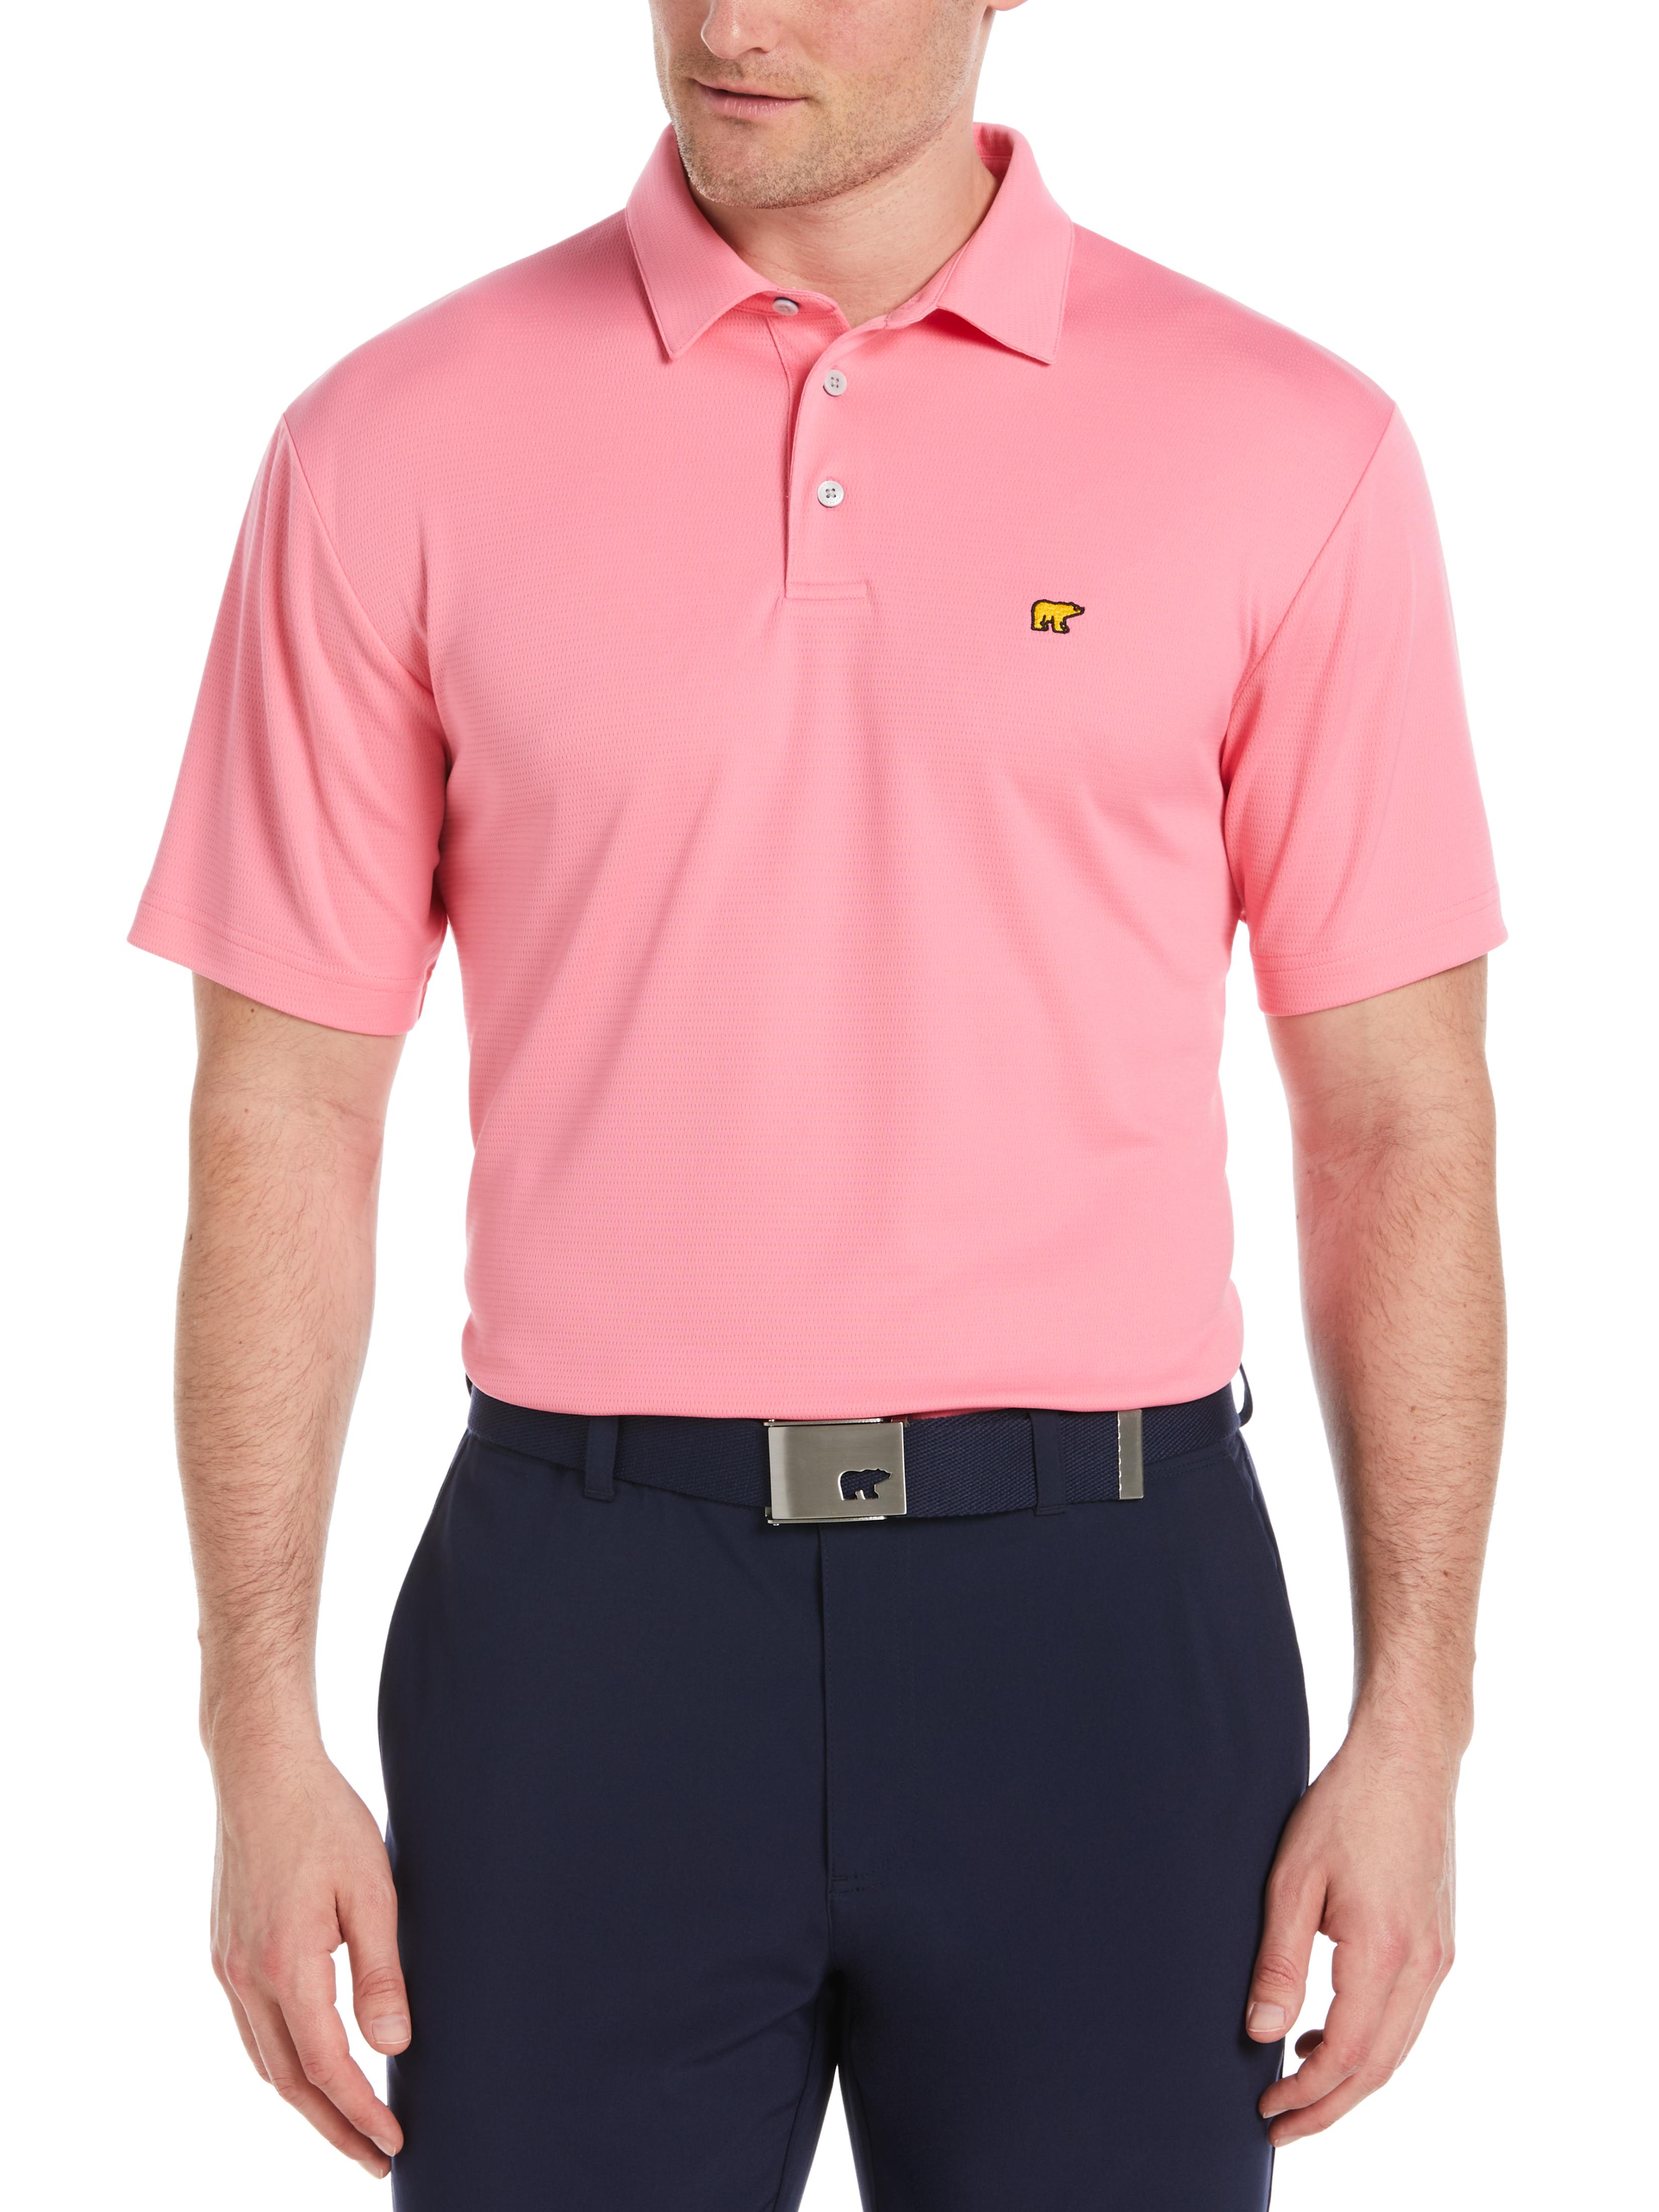 Jack Nicklaus Mens Solid Textured Golf Polo Shirt, Size XL, Flowering Ginger Pink, 100% Polyester | Golf Apparel Shop